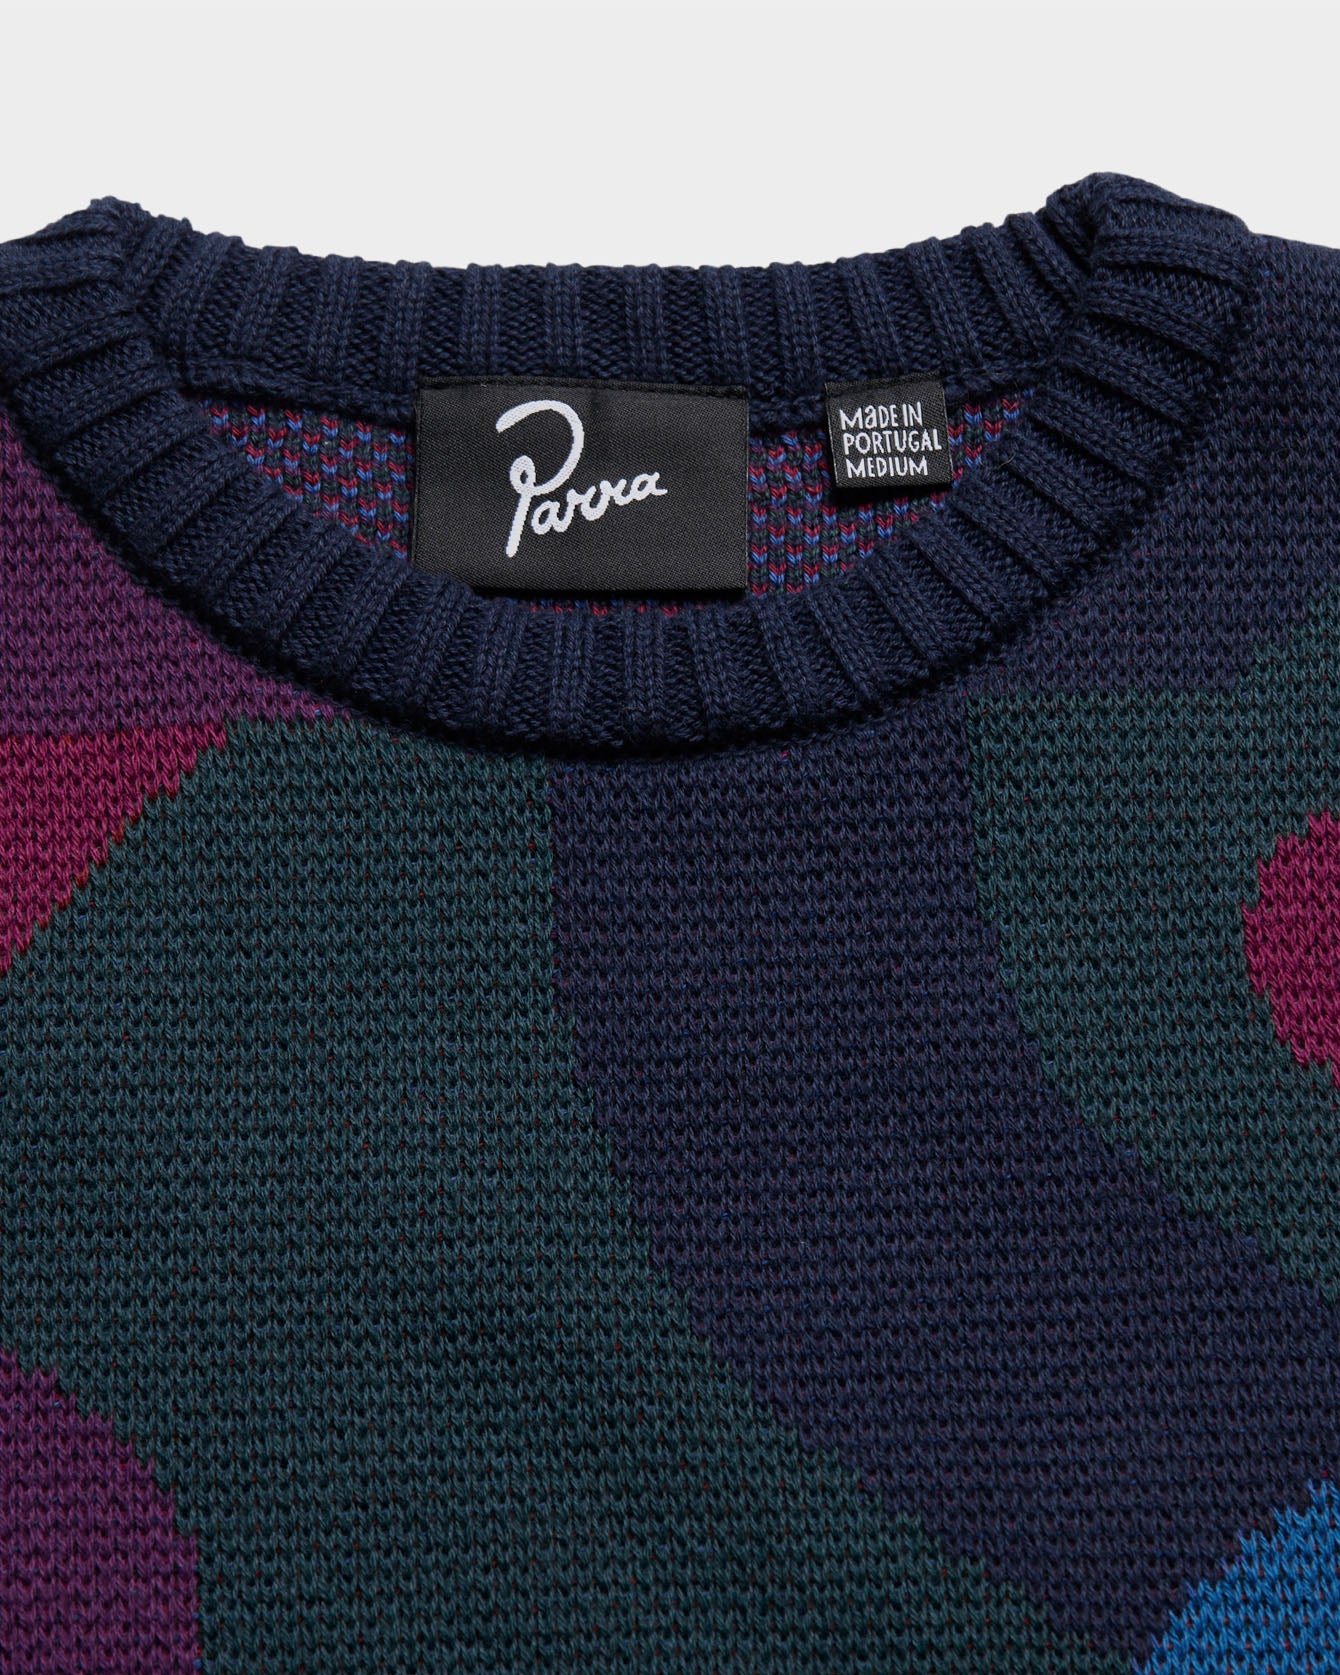 Knotted Knitted Pullover Multicolor